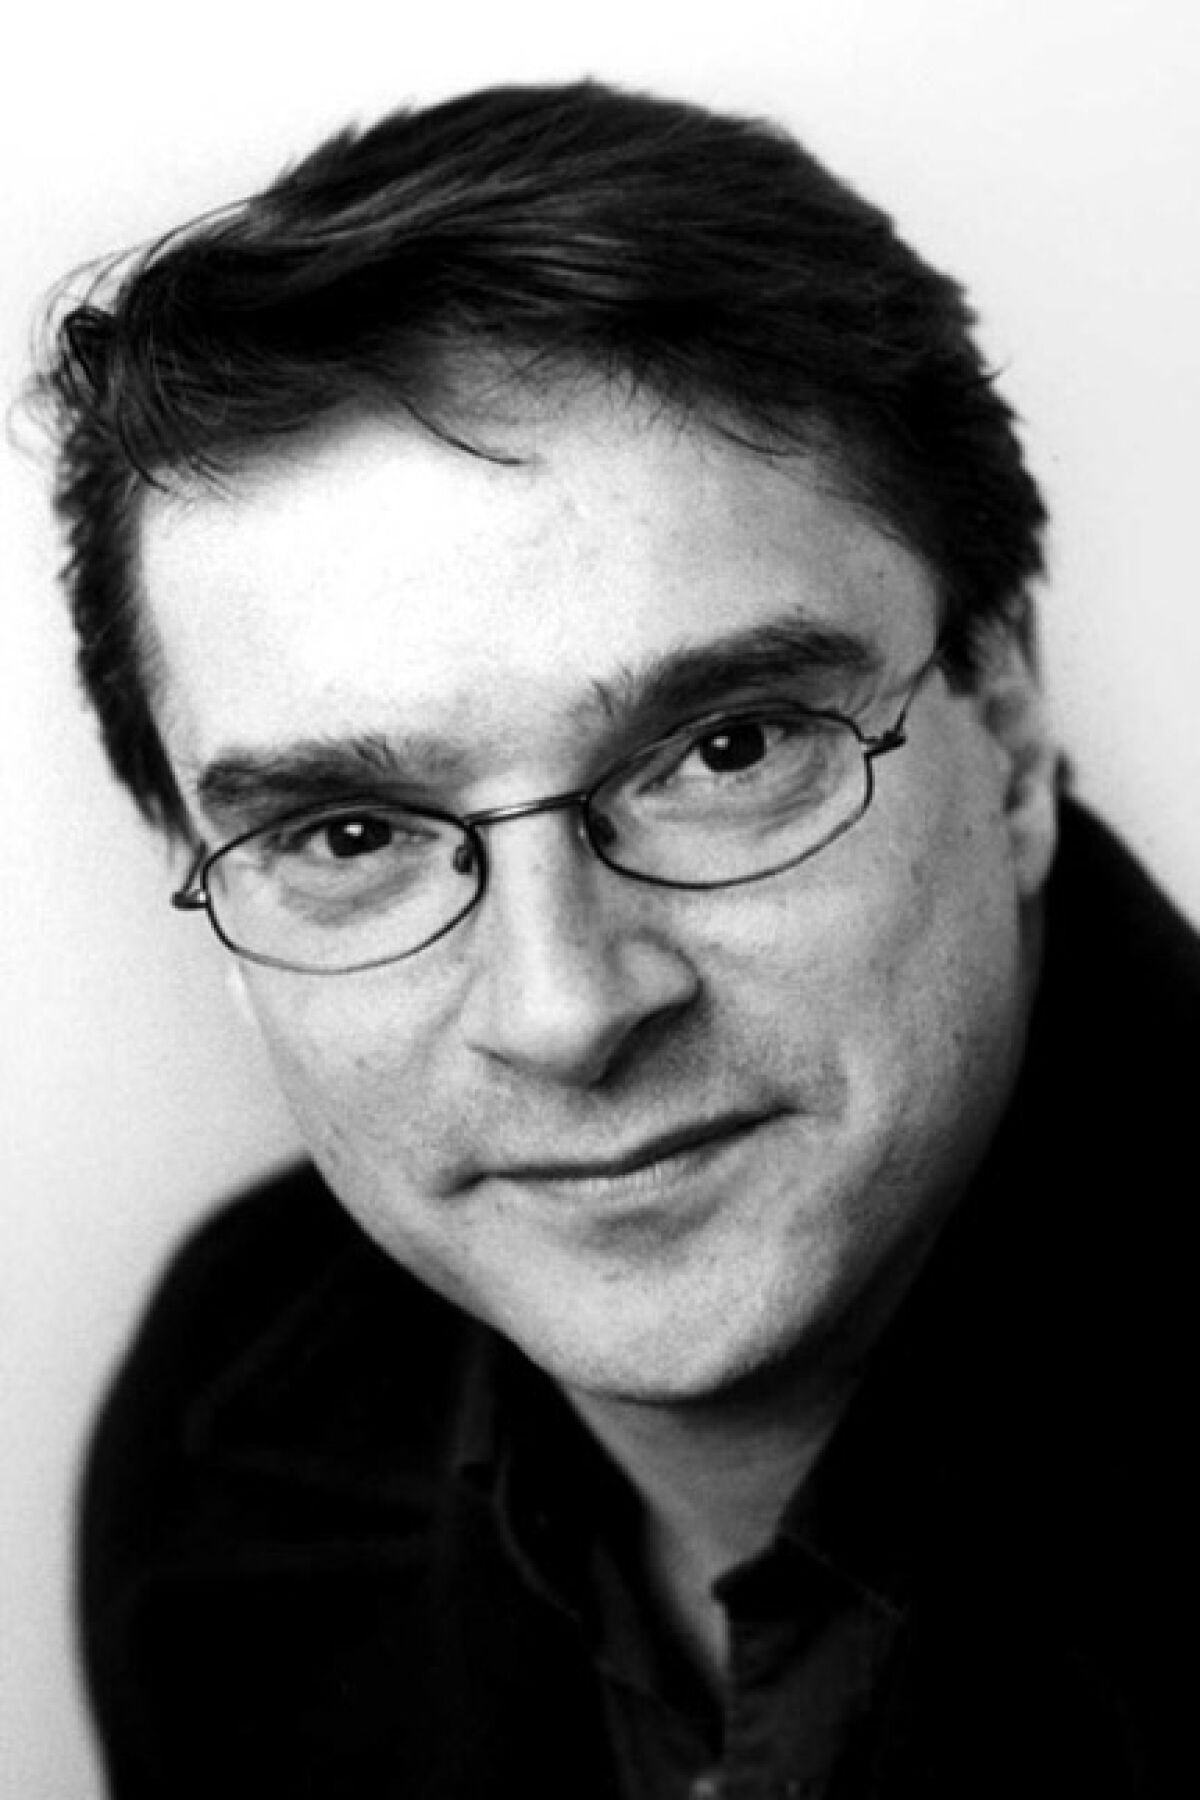 Black and white photo of a man with dark hair wearing glasses.